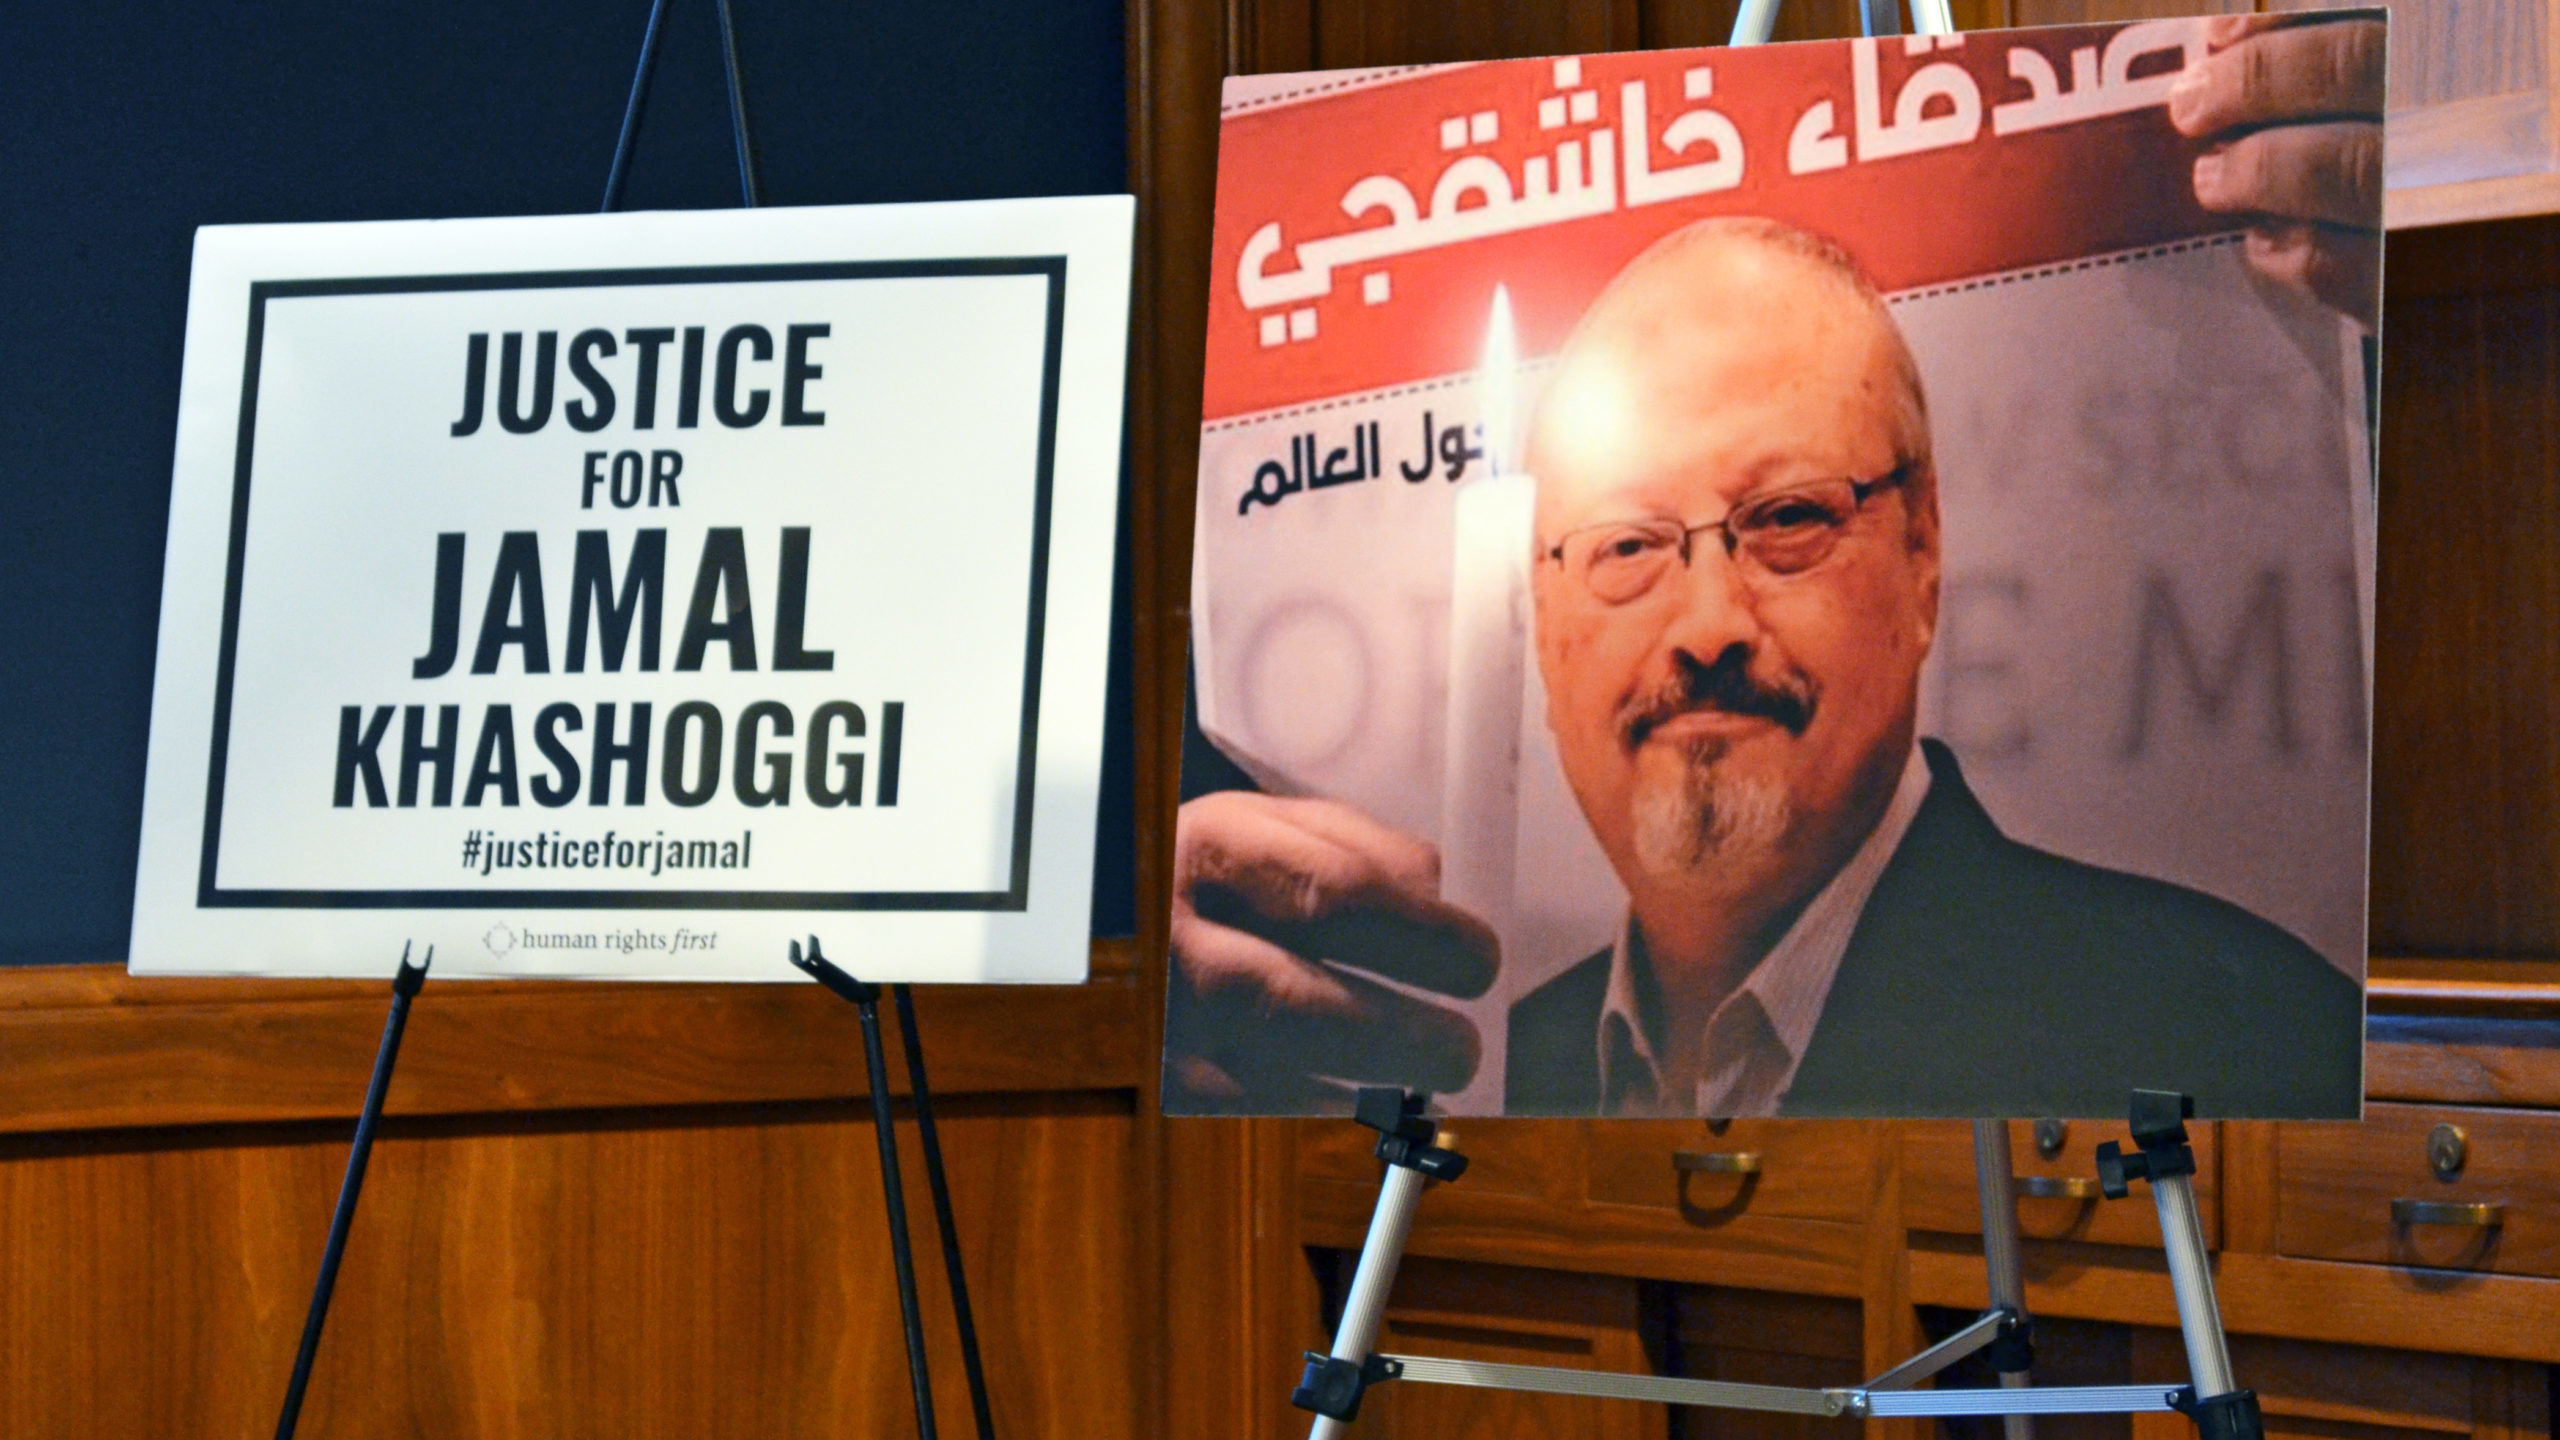 Alleged Khashoggi Killers to Be Tried in Absentia